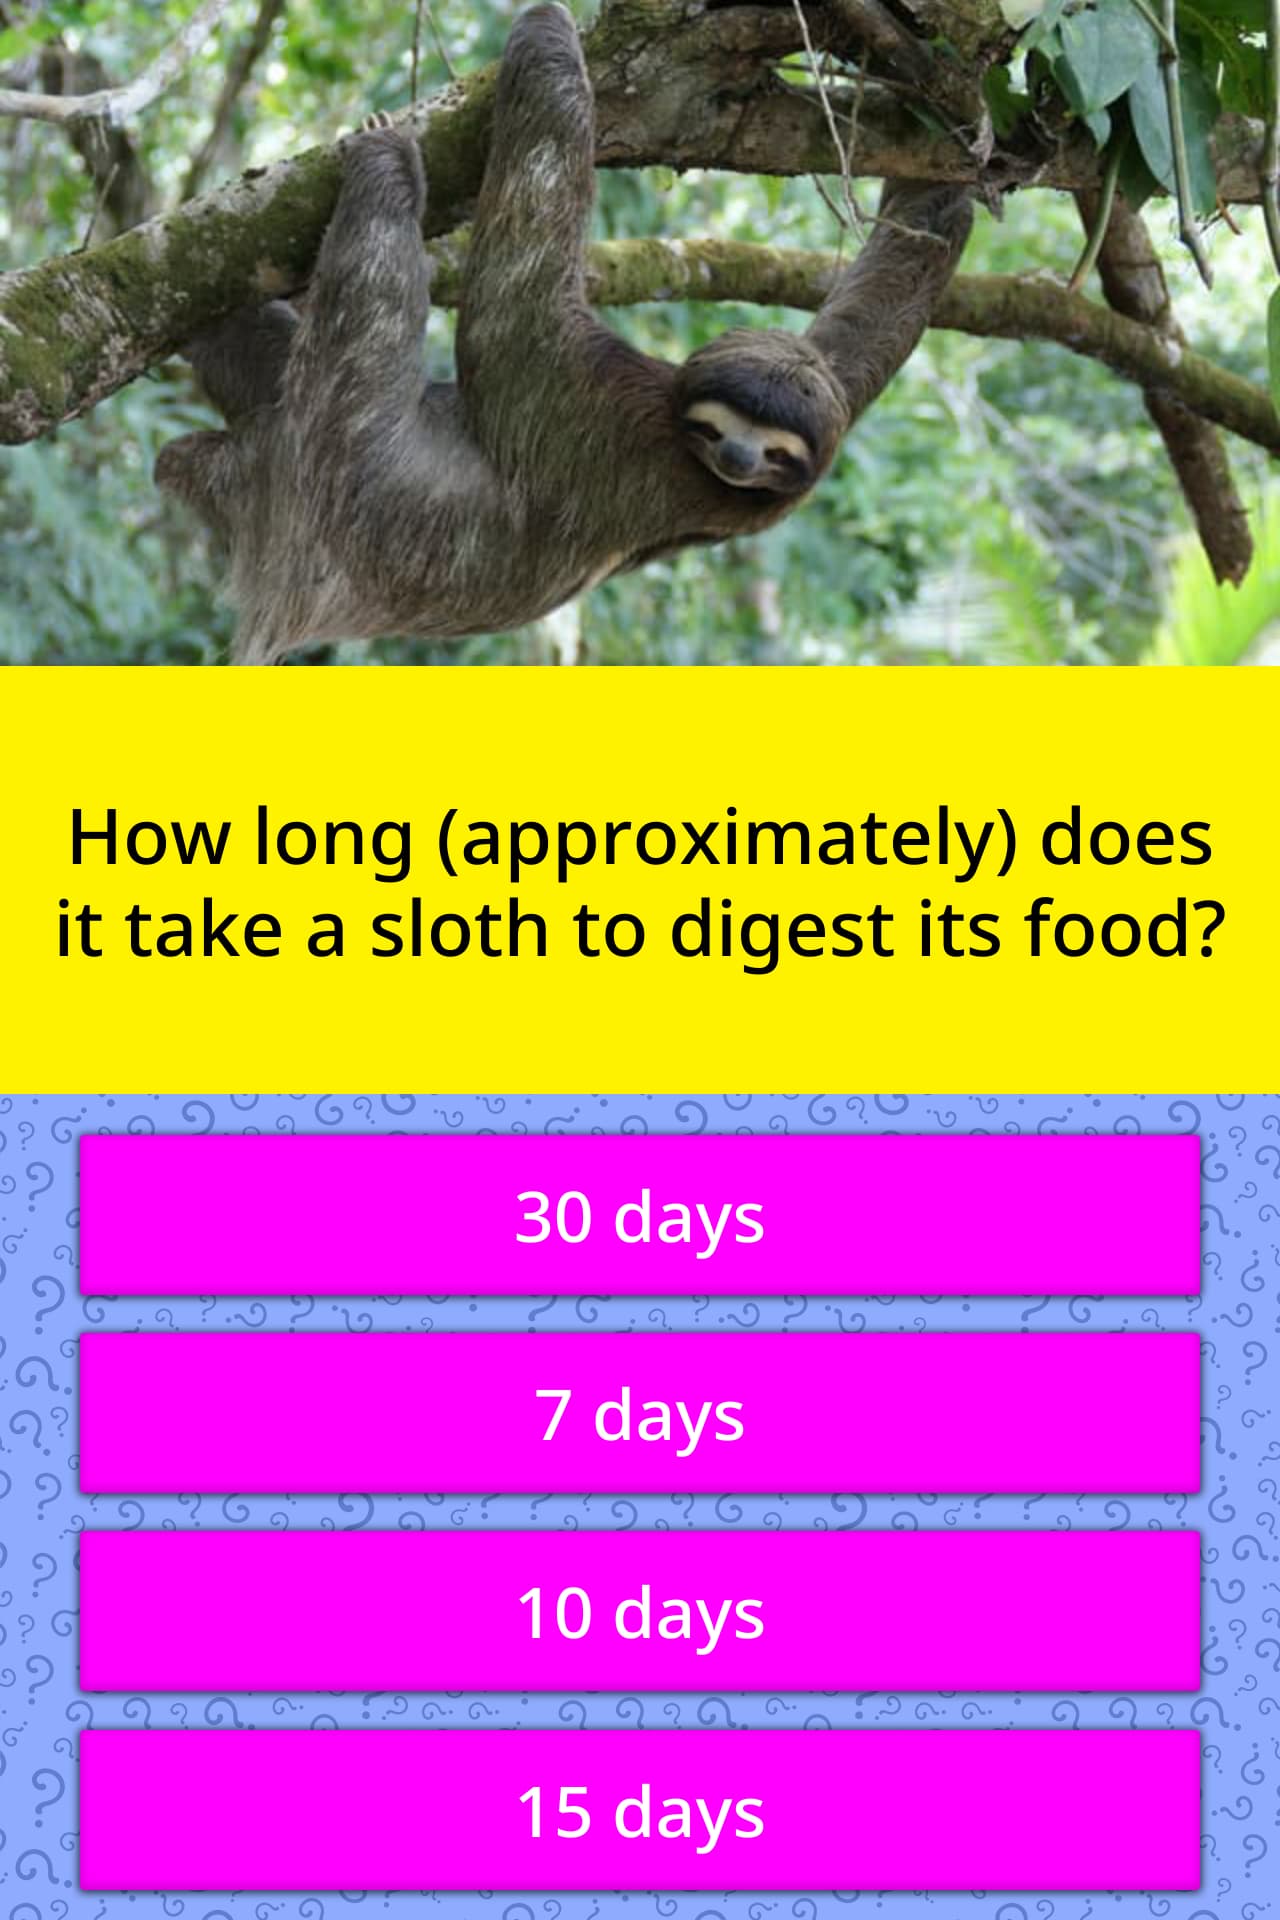 How much time a does sloth need to digest the food?